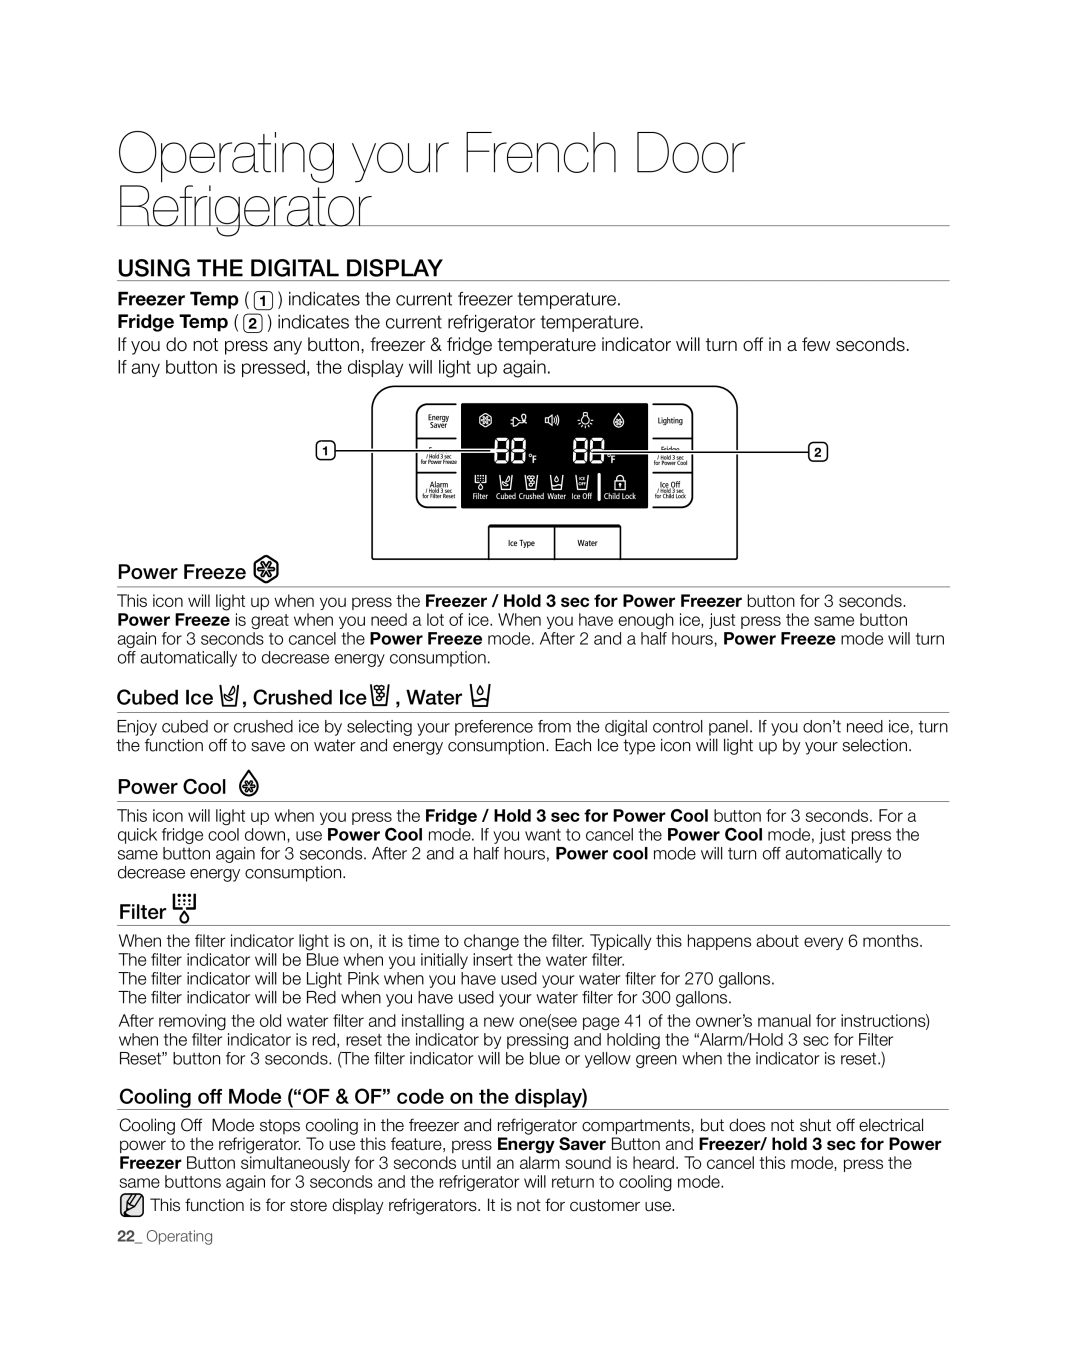 Samsung RFG238 Operating your French Door Refrigerator, Using The Digital Display, Power Freeze, Power Cool, Filter 